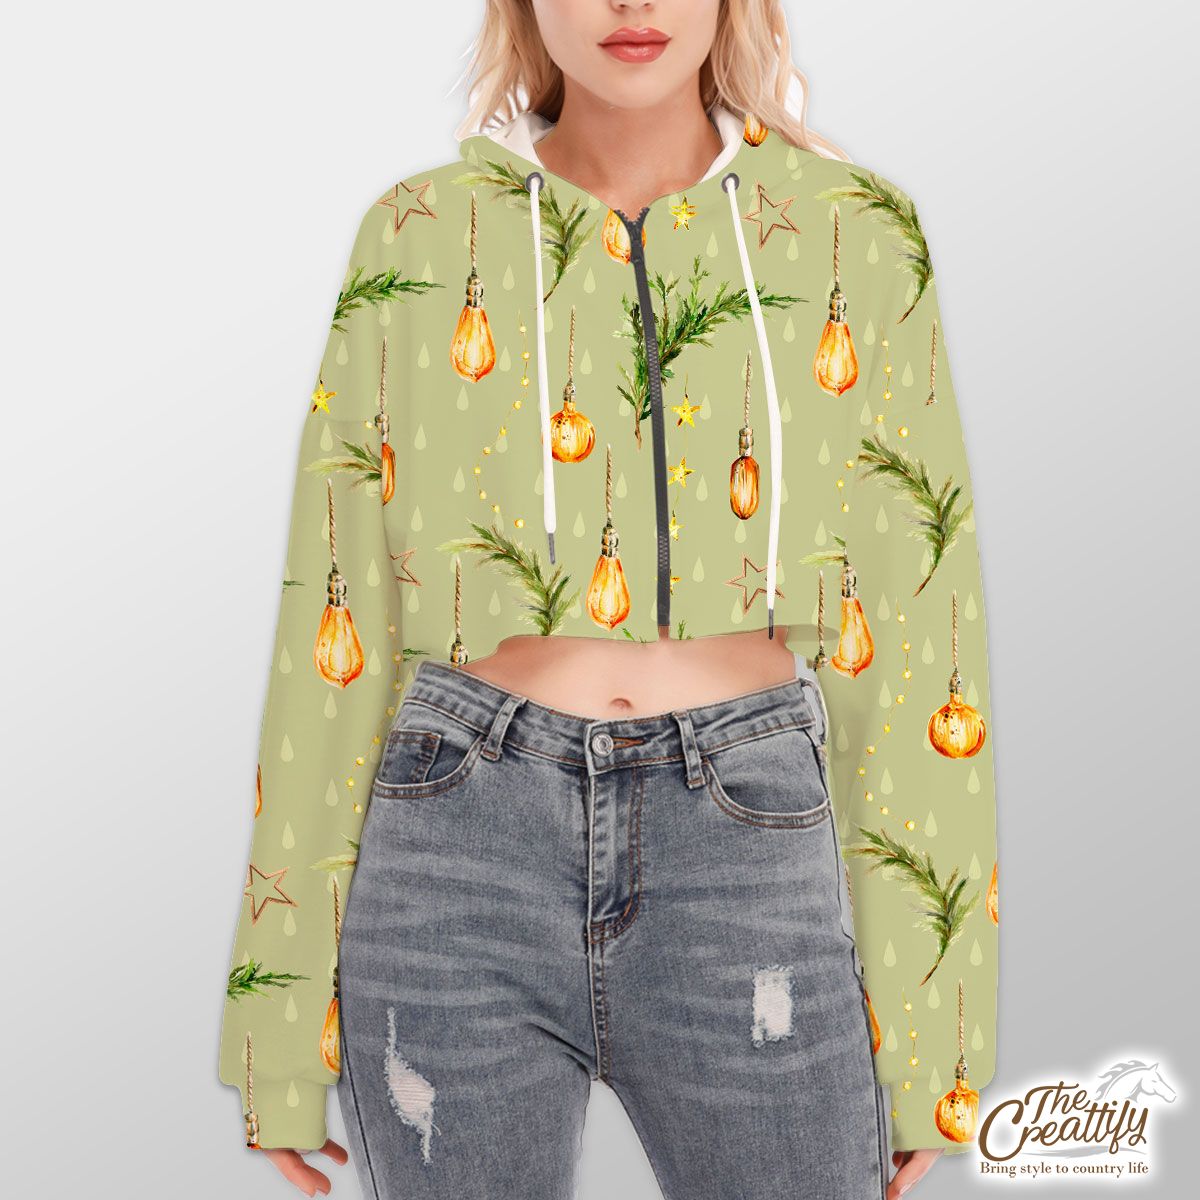 Christmas Lights With Pine Tree Pattern Hoodie With Zipper Closure